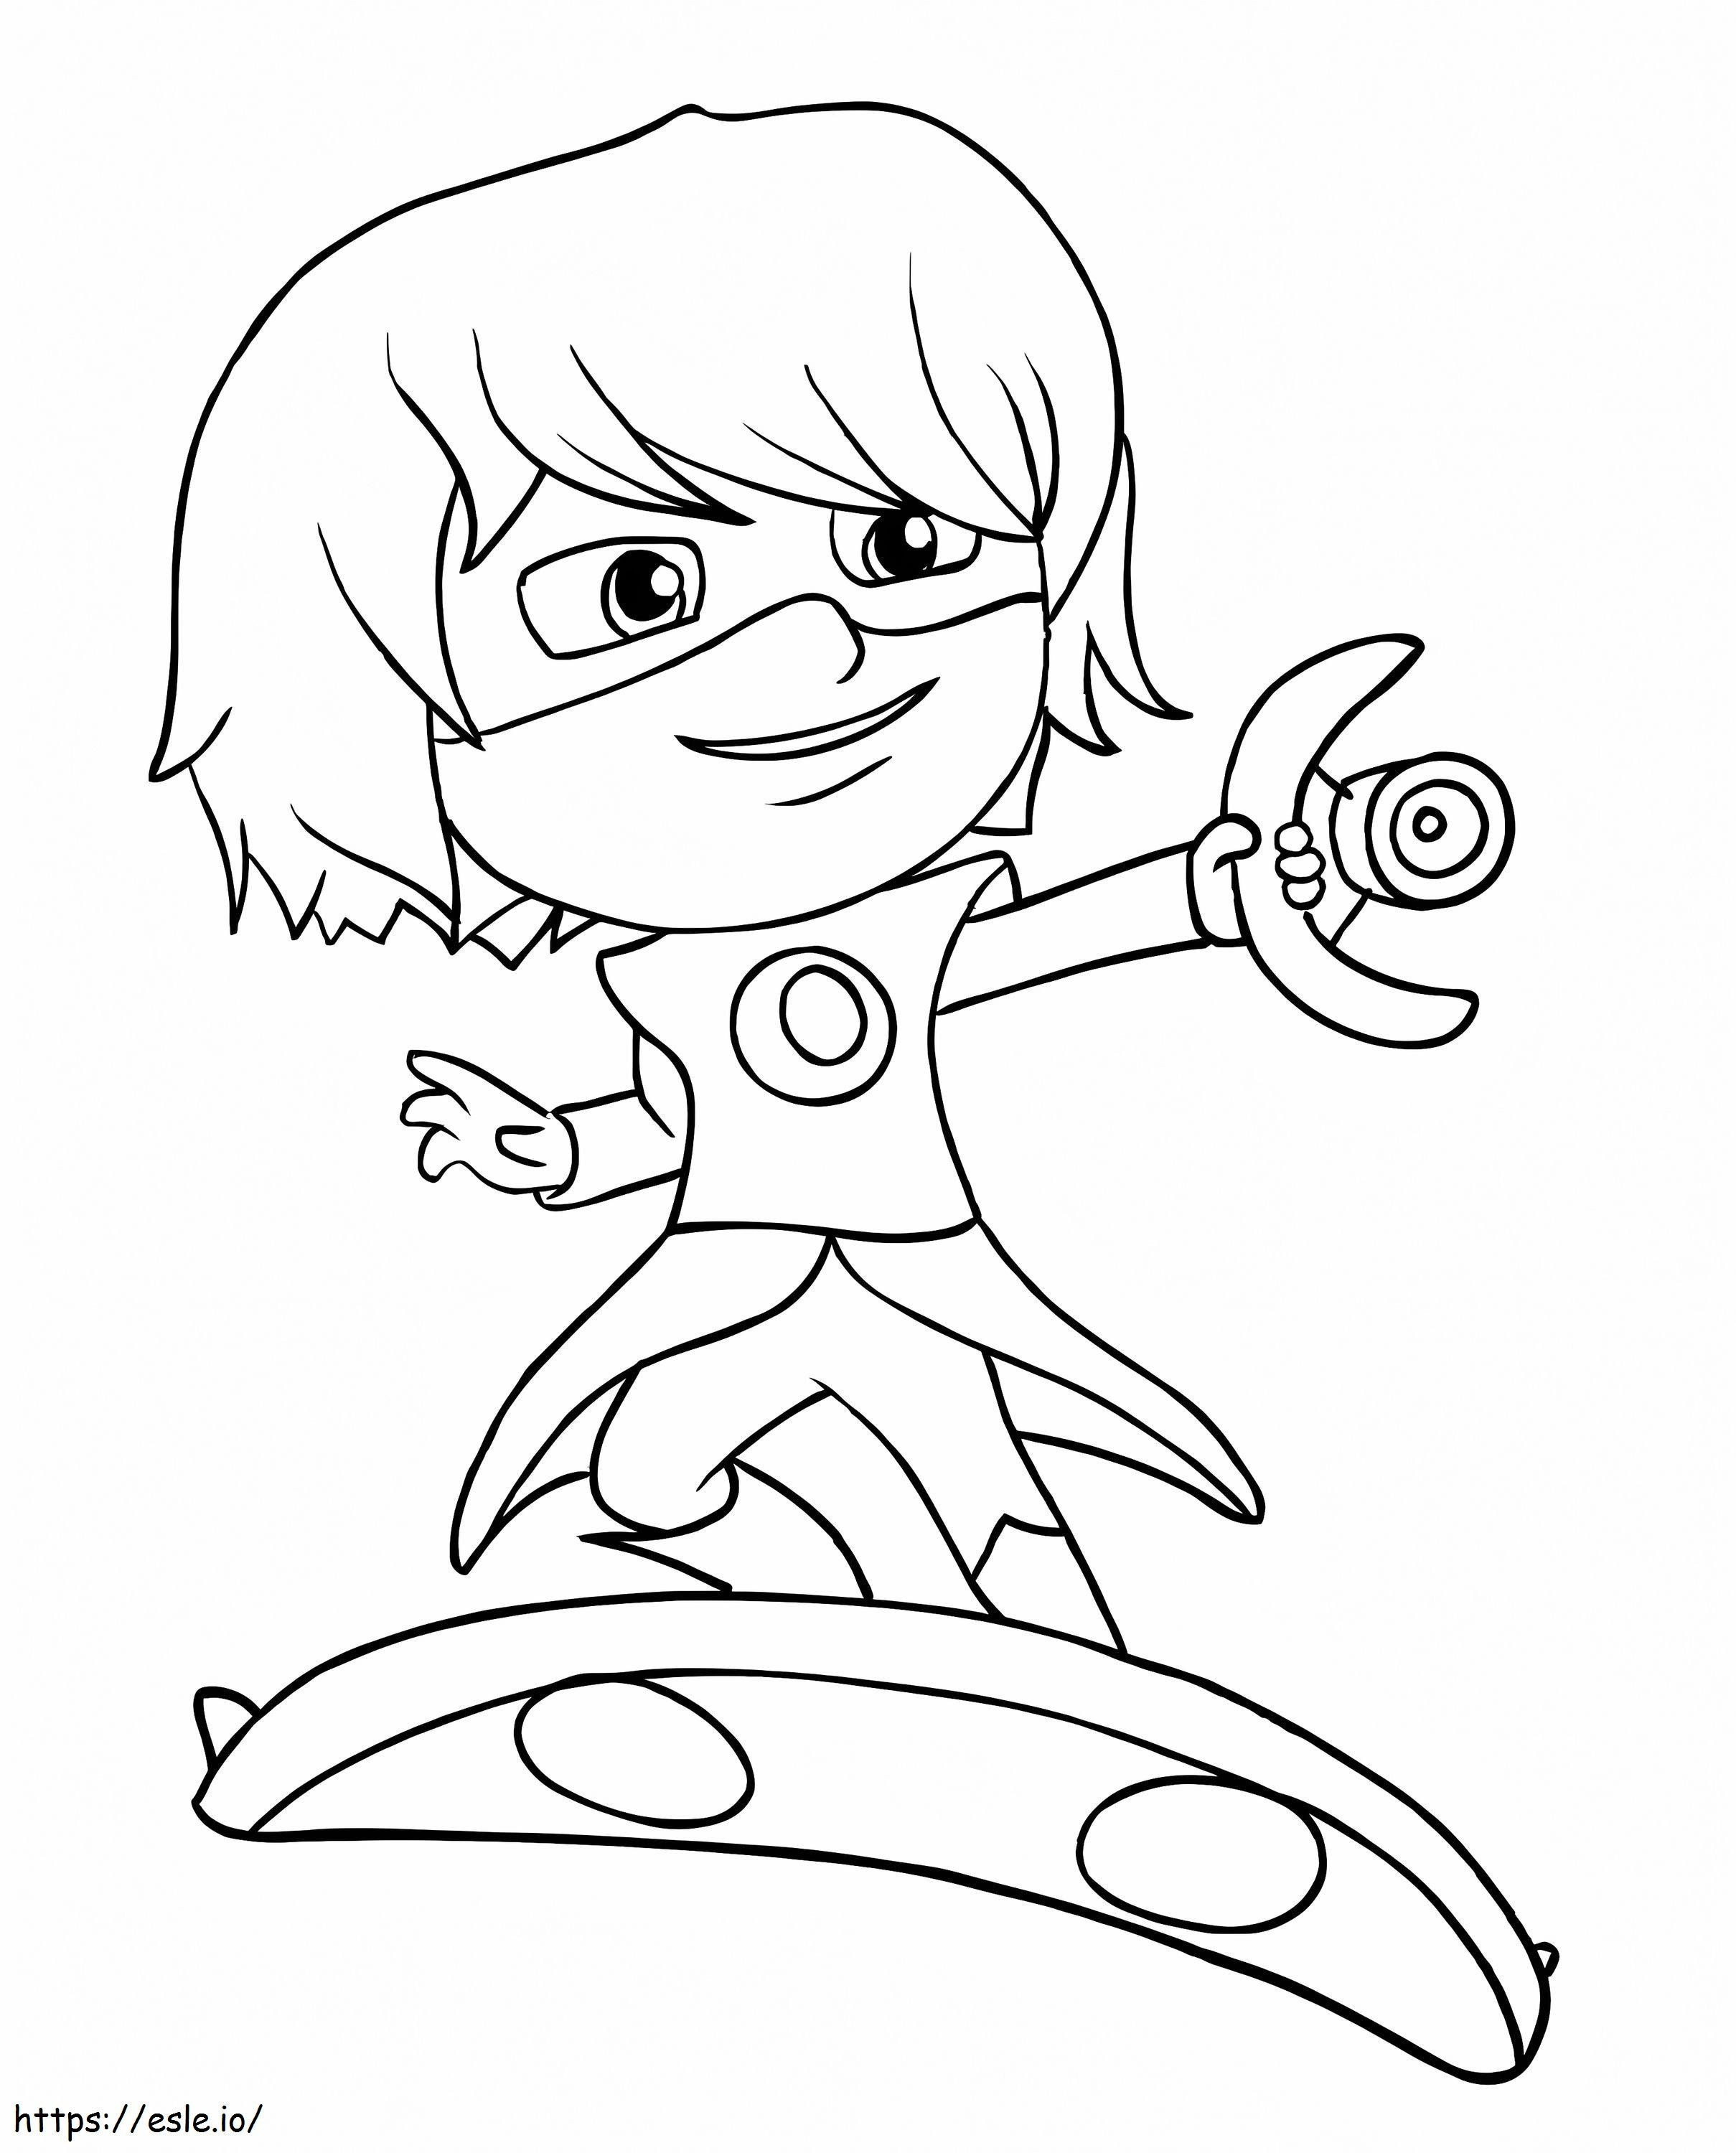 Luna Girl From PJ Masks coloring page